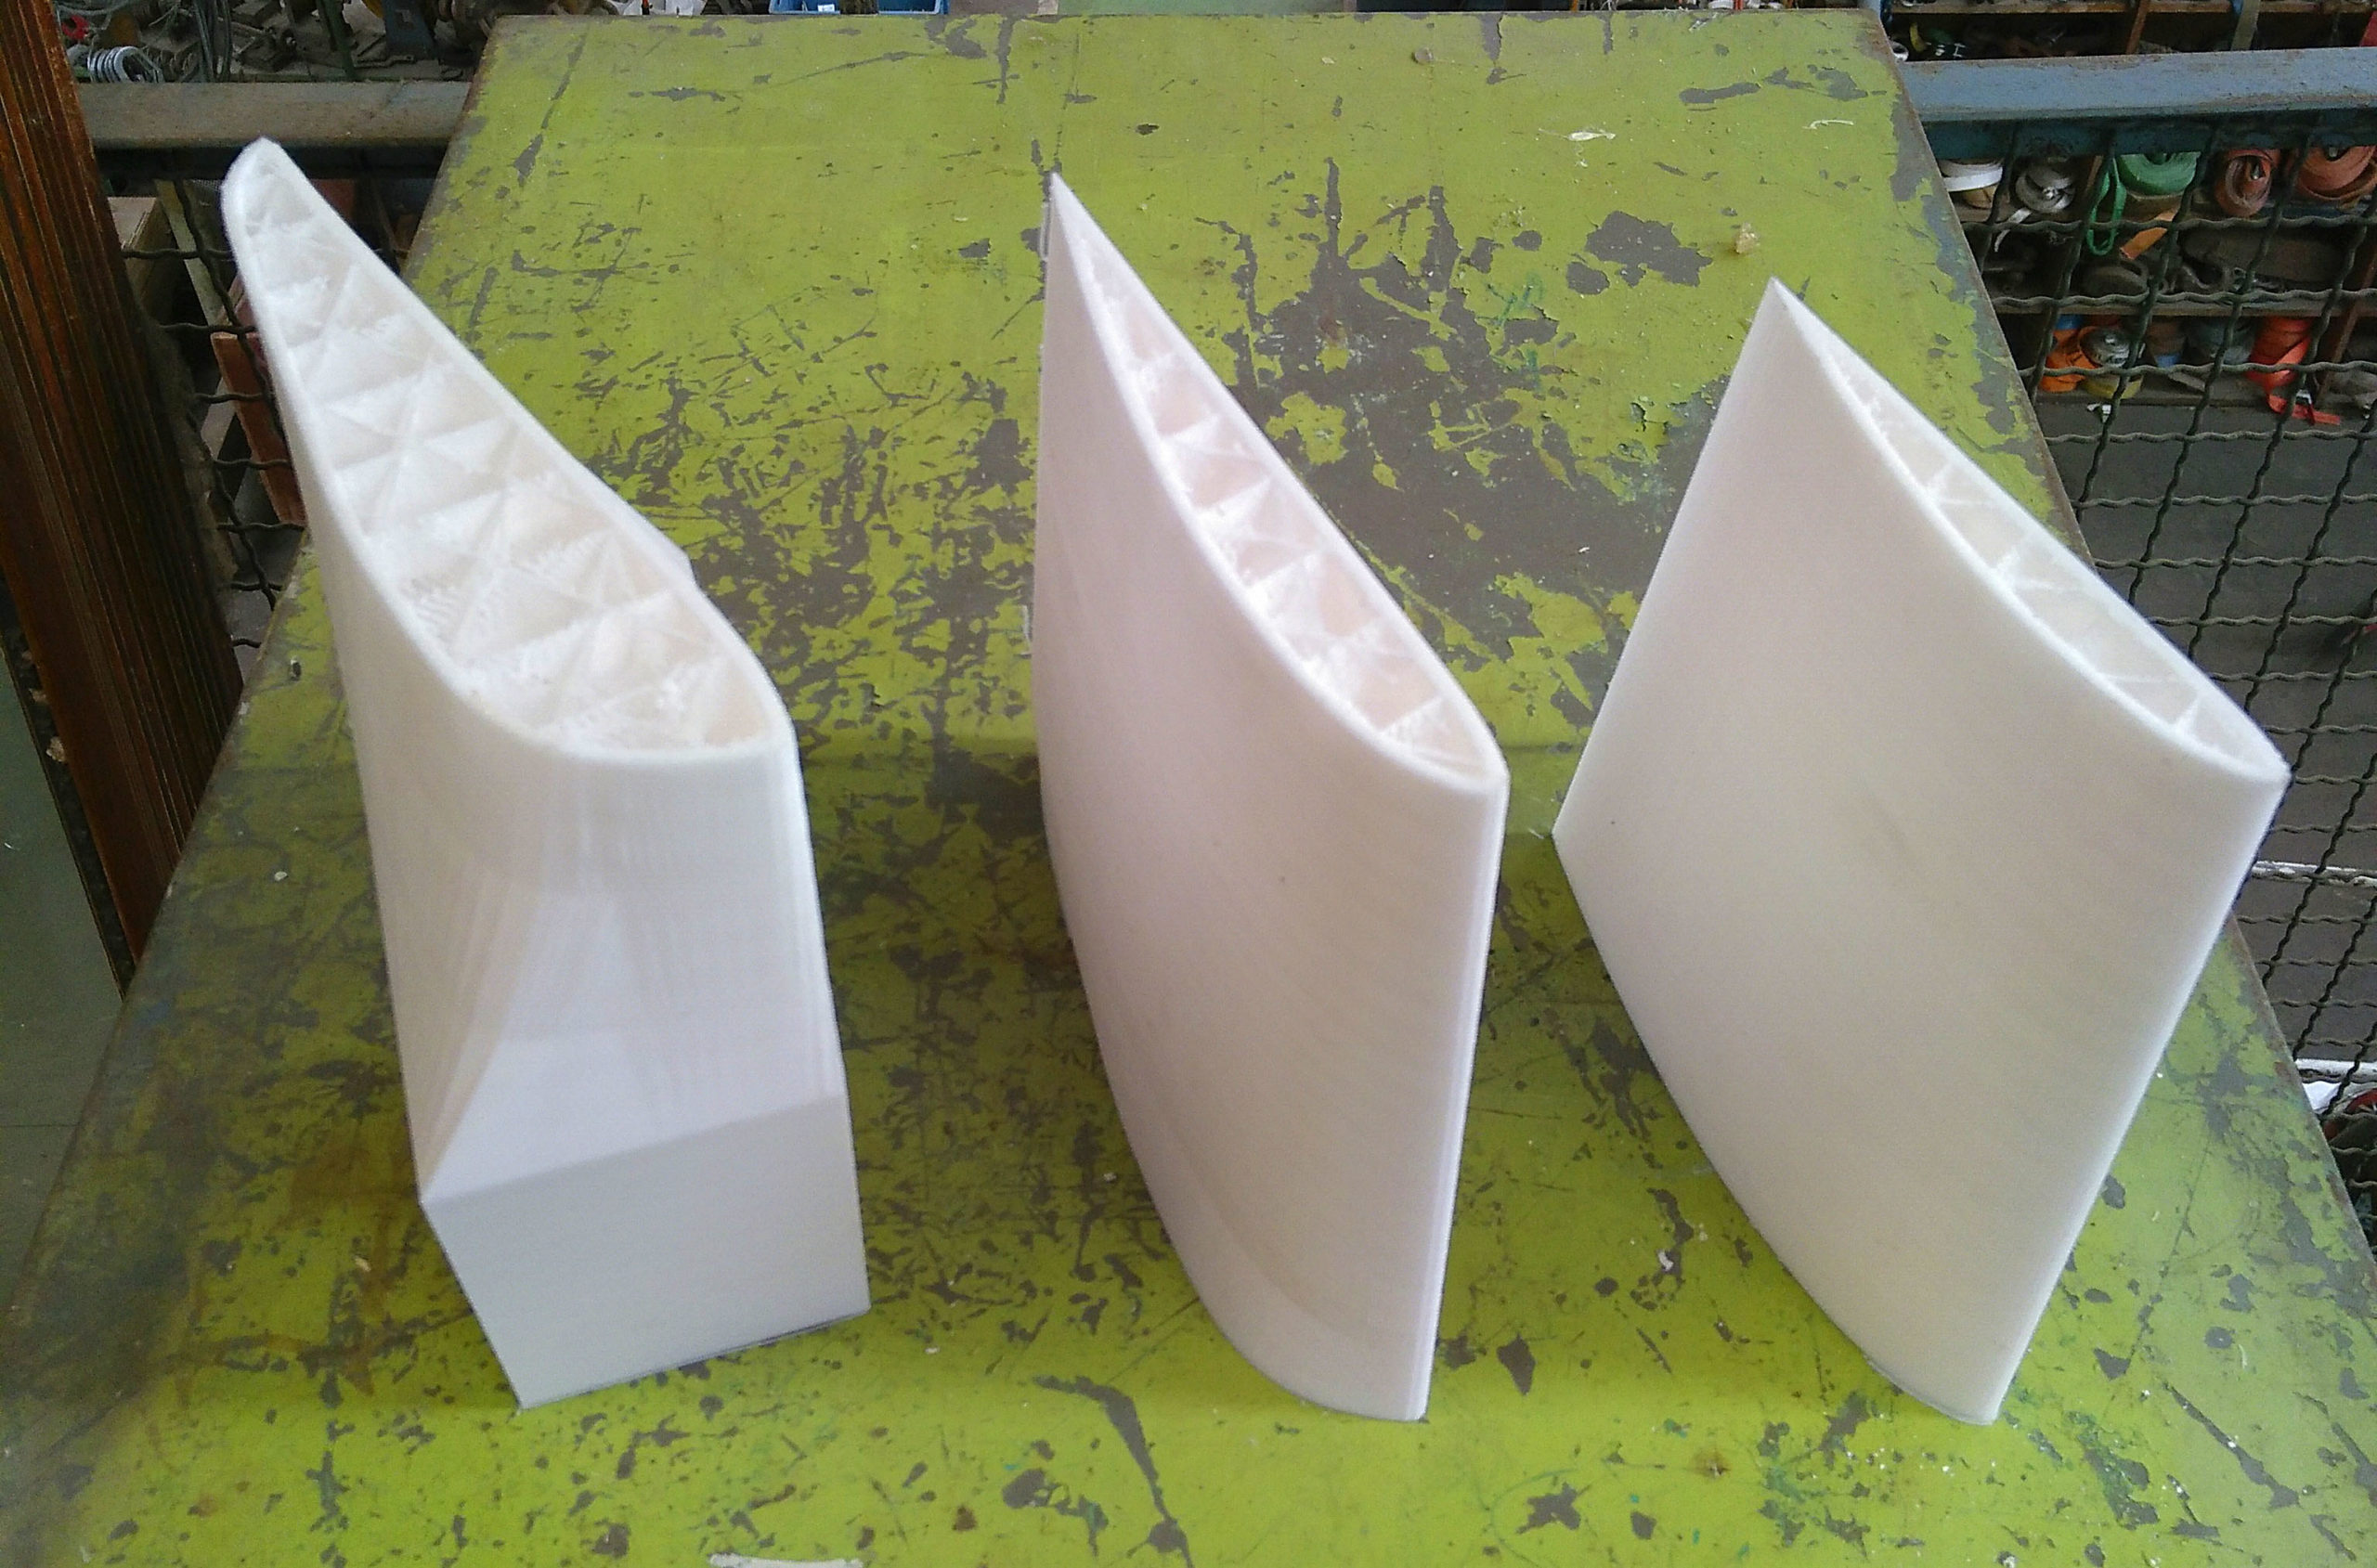 Construction of worlds first 3D-printed real-size windturbine has started!